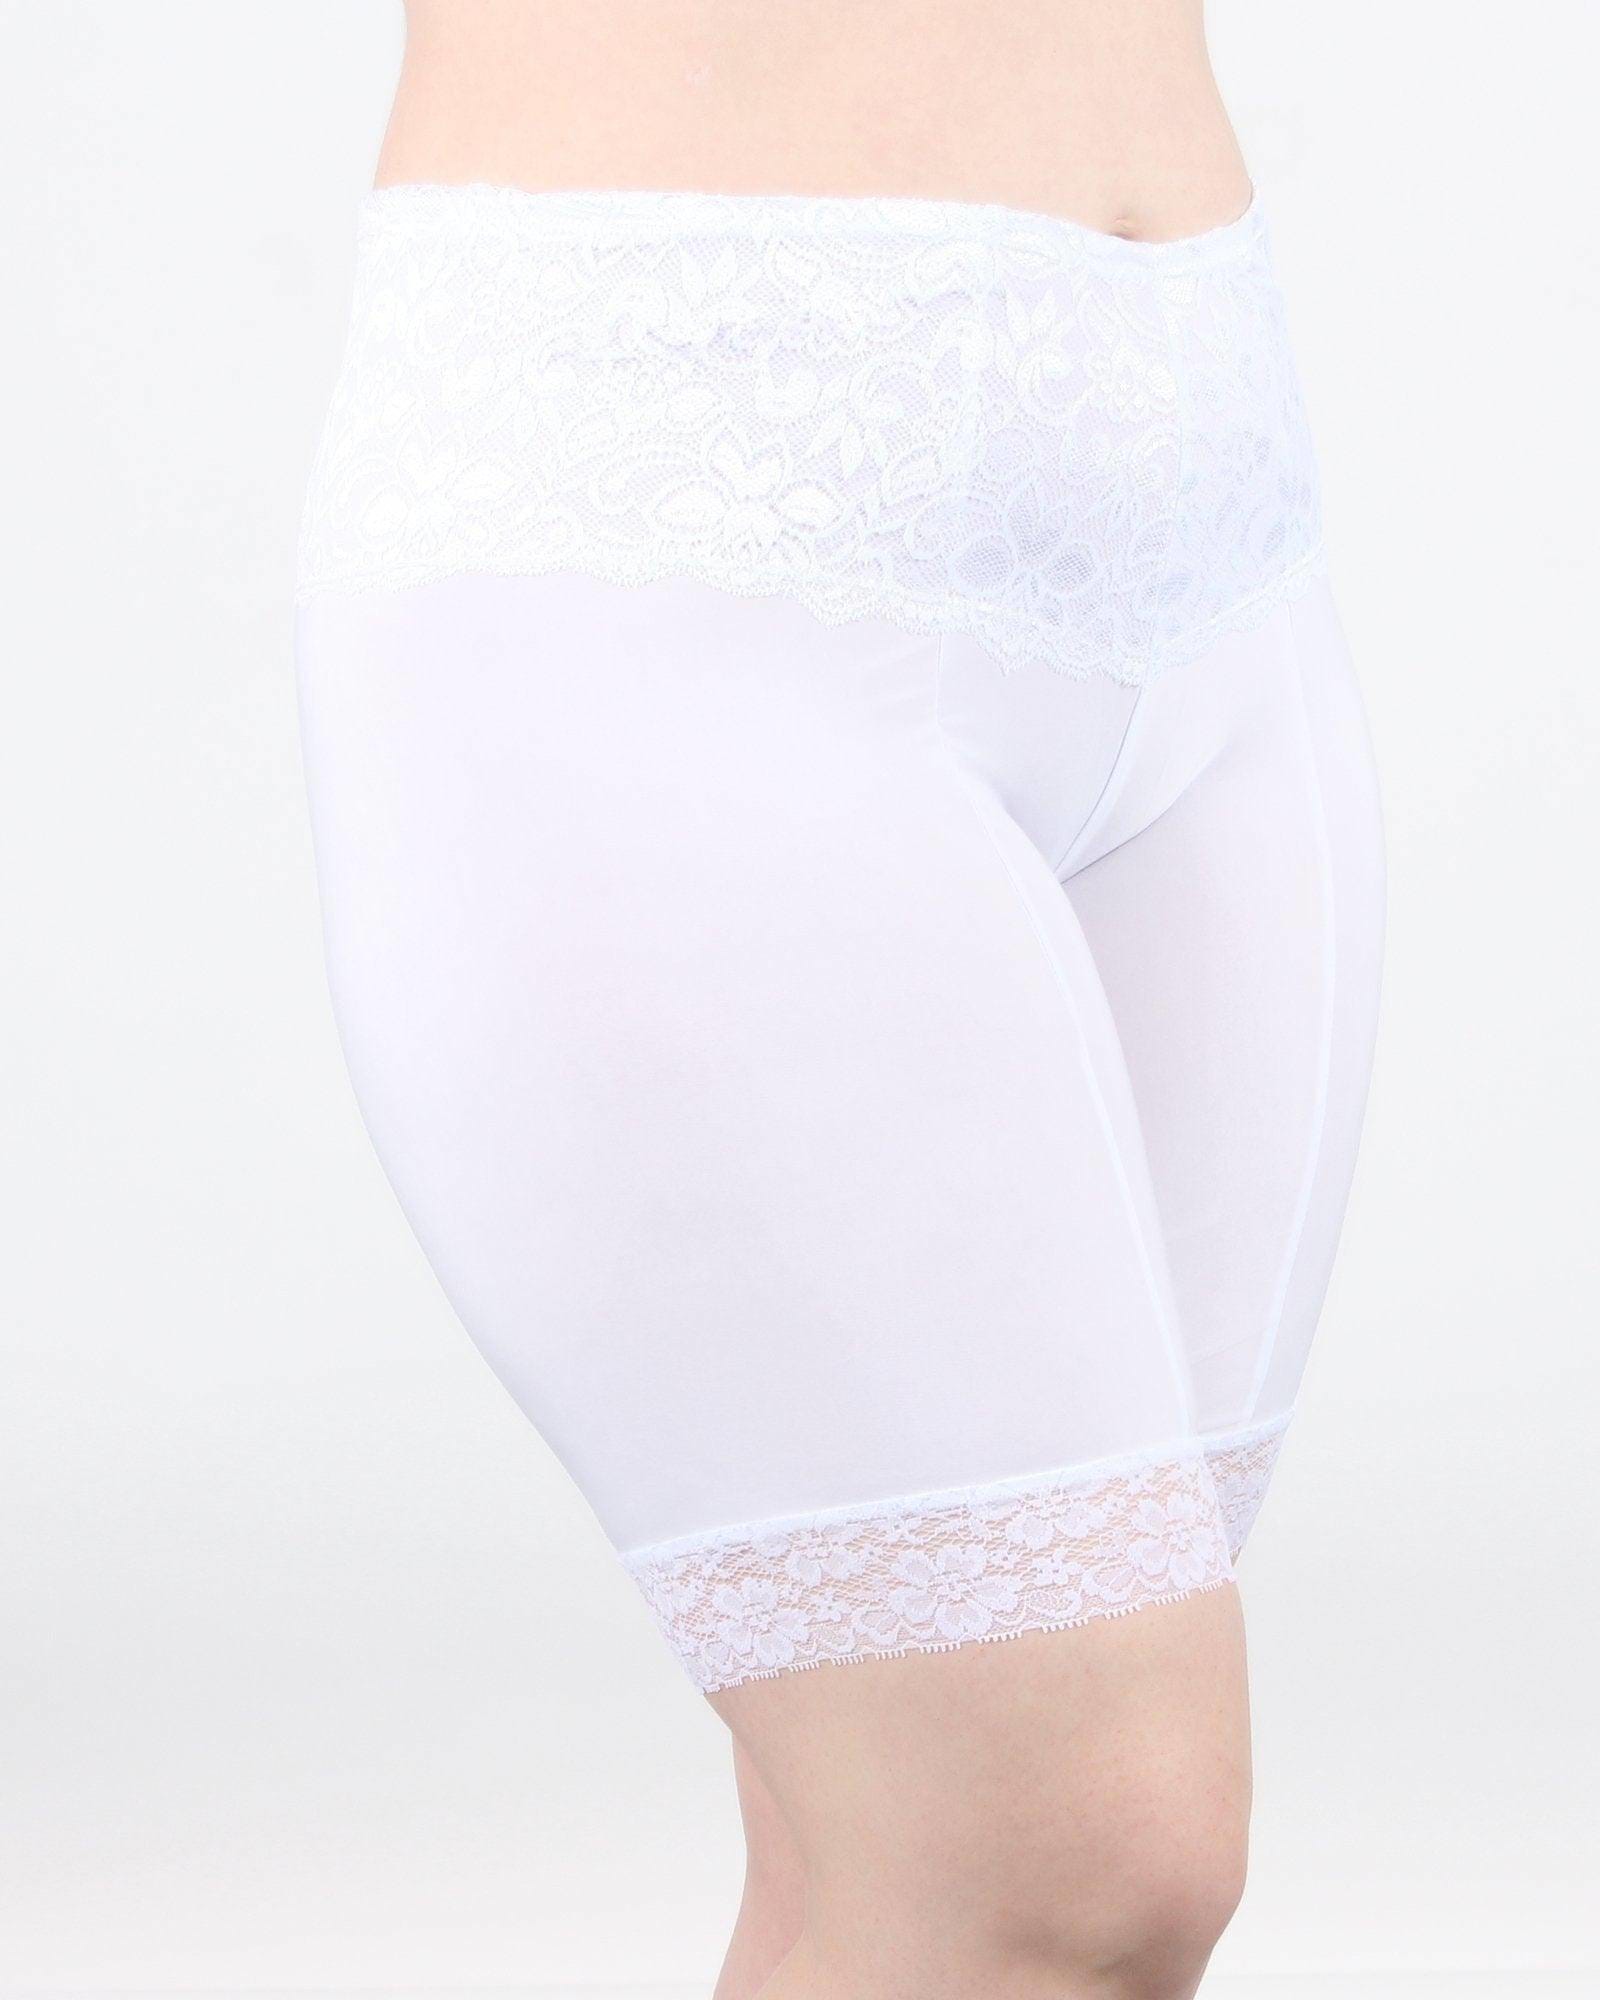 Plus Size Lace Anti Chafing Shortlette Slipshort